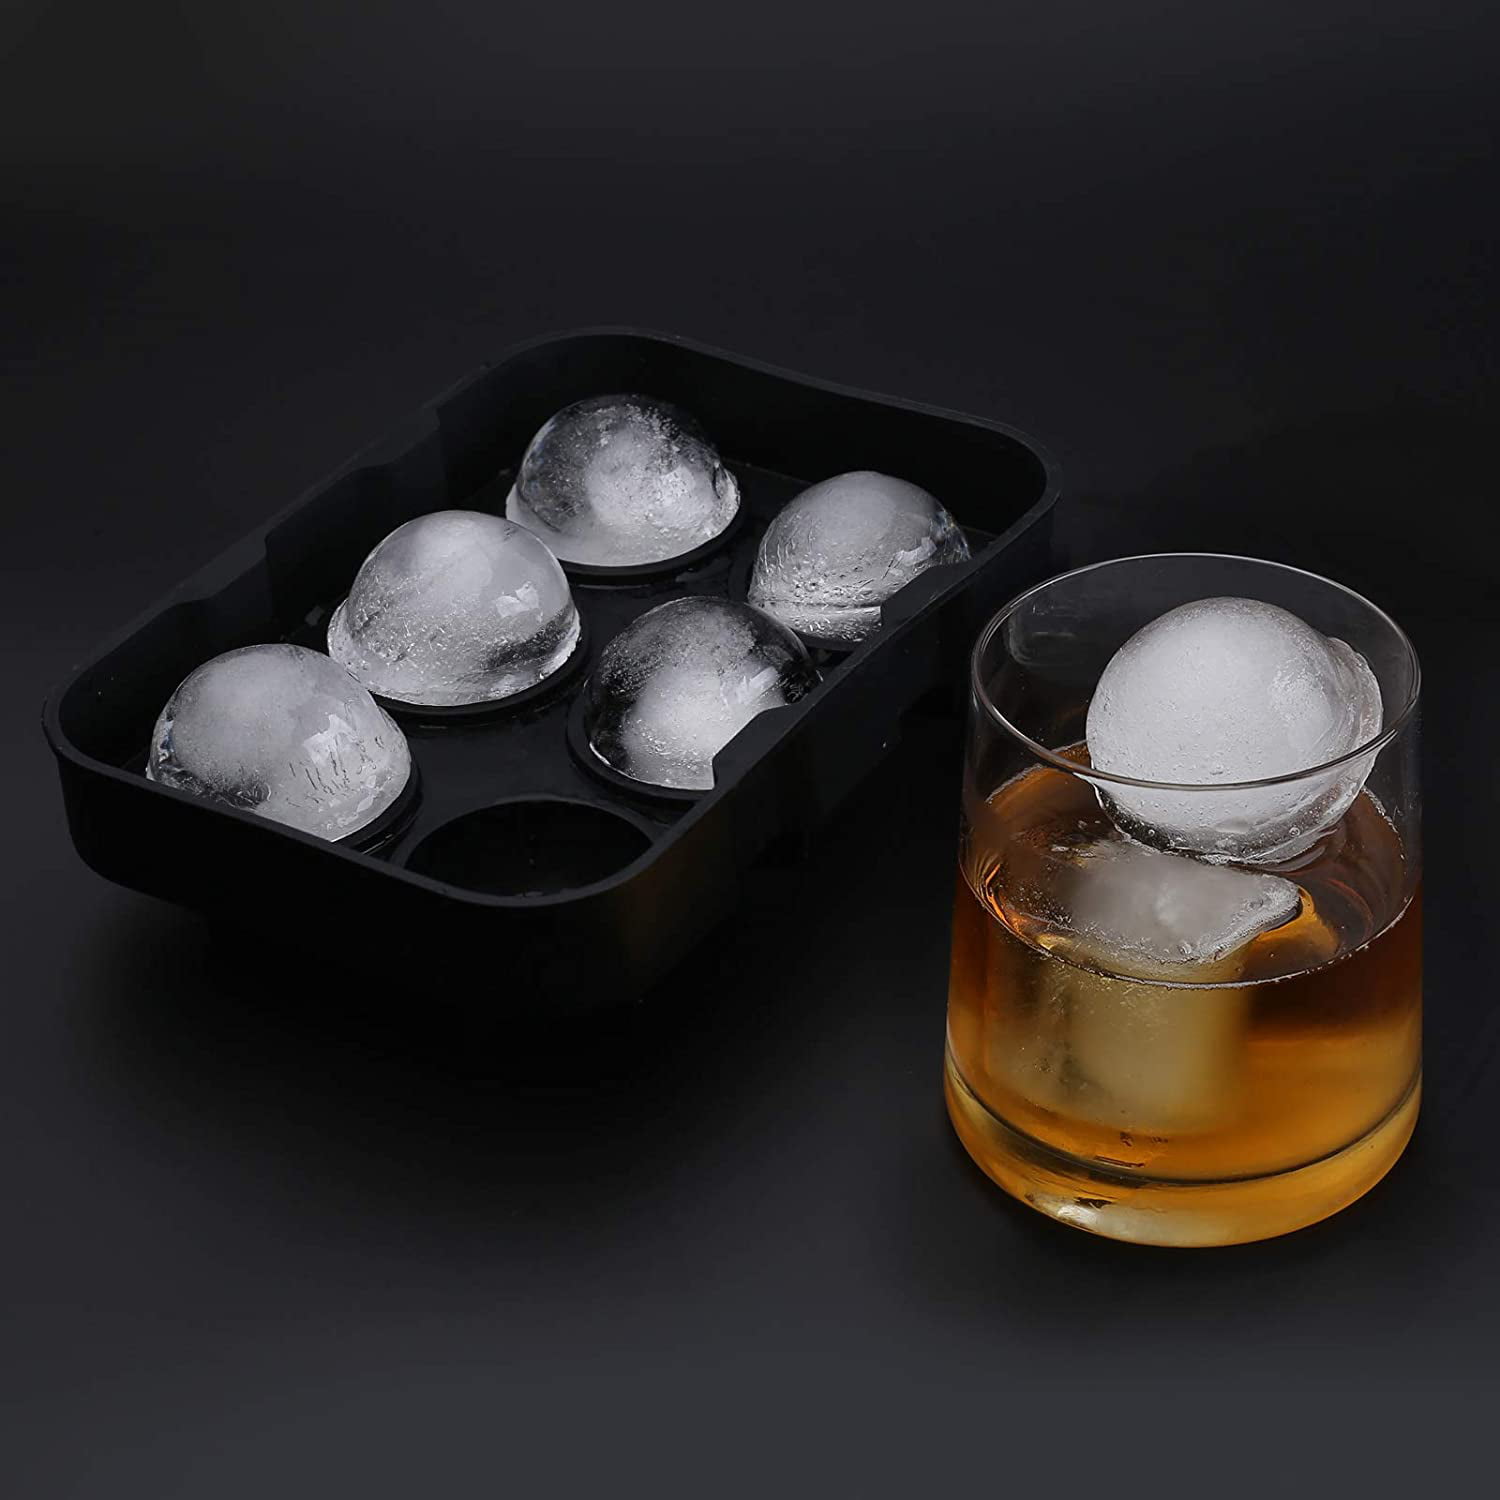 Silicone world 24/15 Grids Silicone Ice Cube Mold Trays with Lids Icecream  Cold Drinks Whiskey Cocktails Kitchen Tools Ice Mold